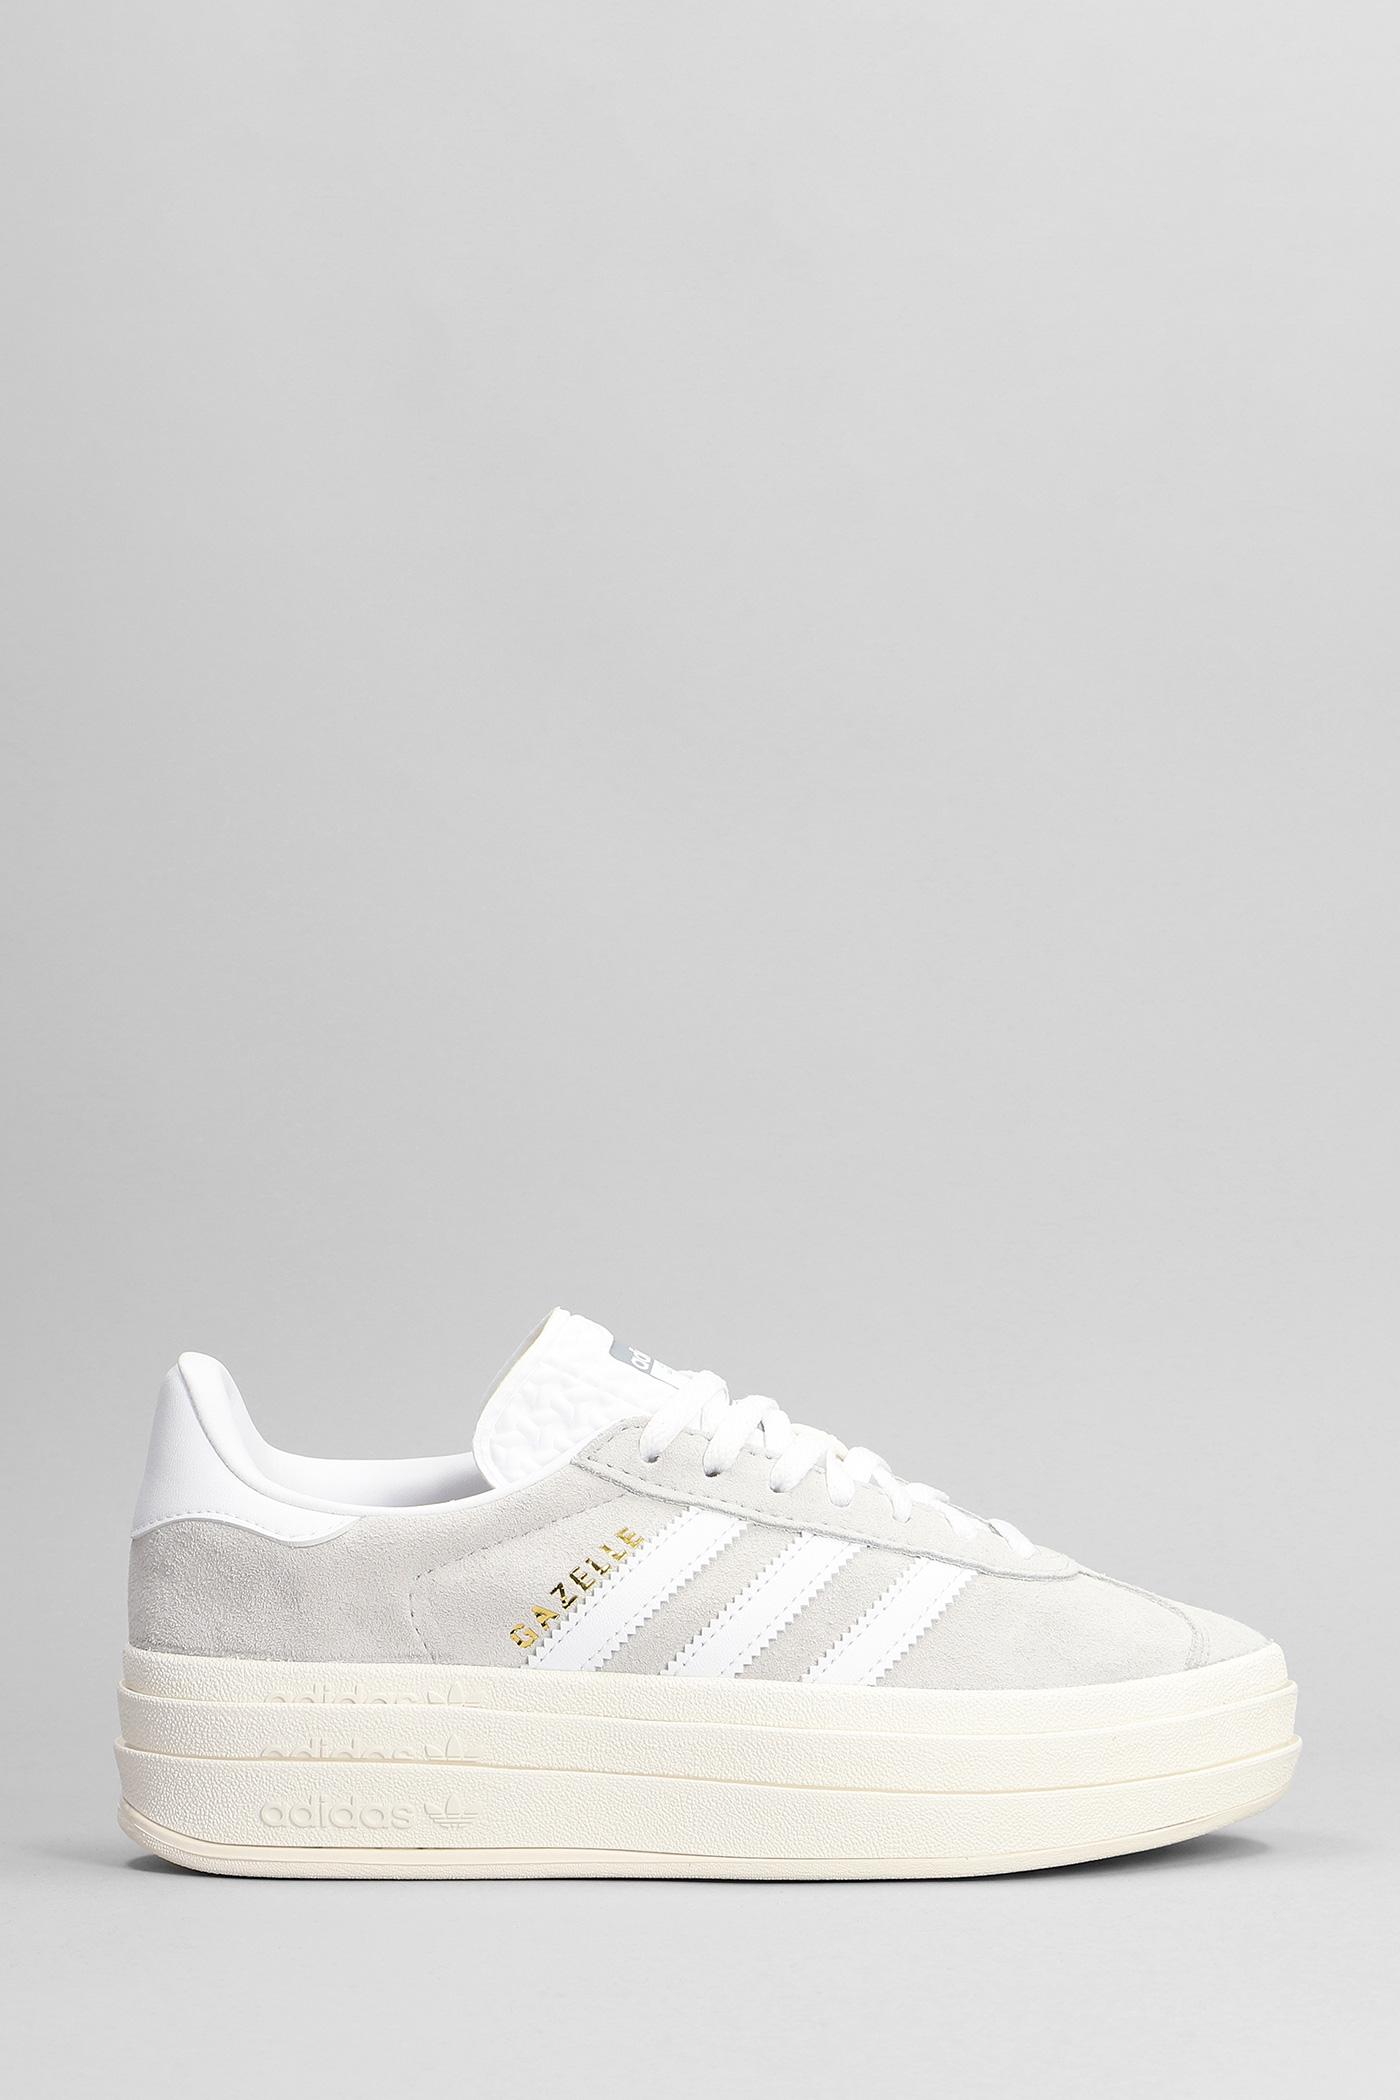 adidas Bold Sneakers Grey Suede in White | Lyst